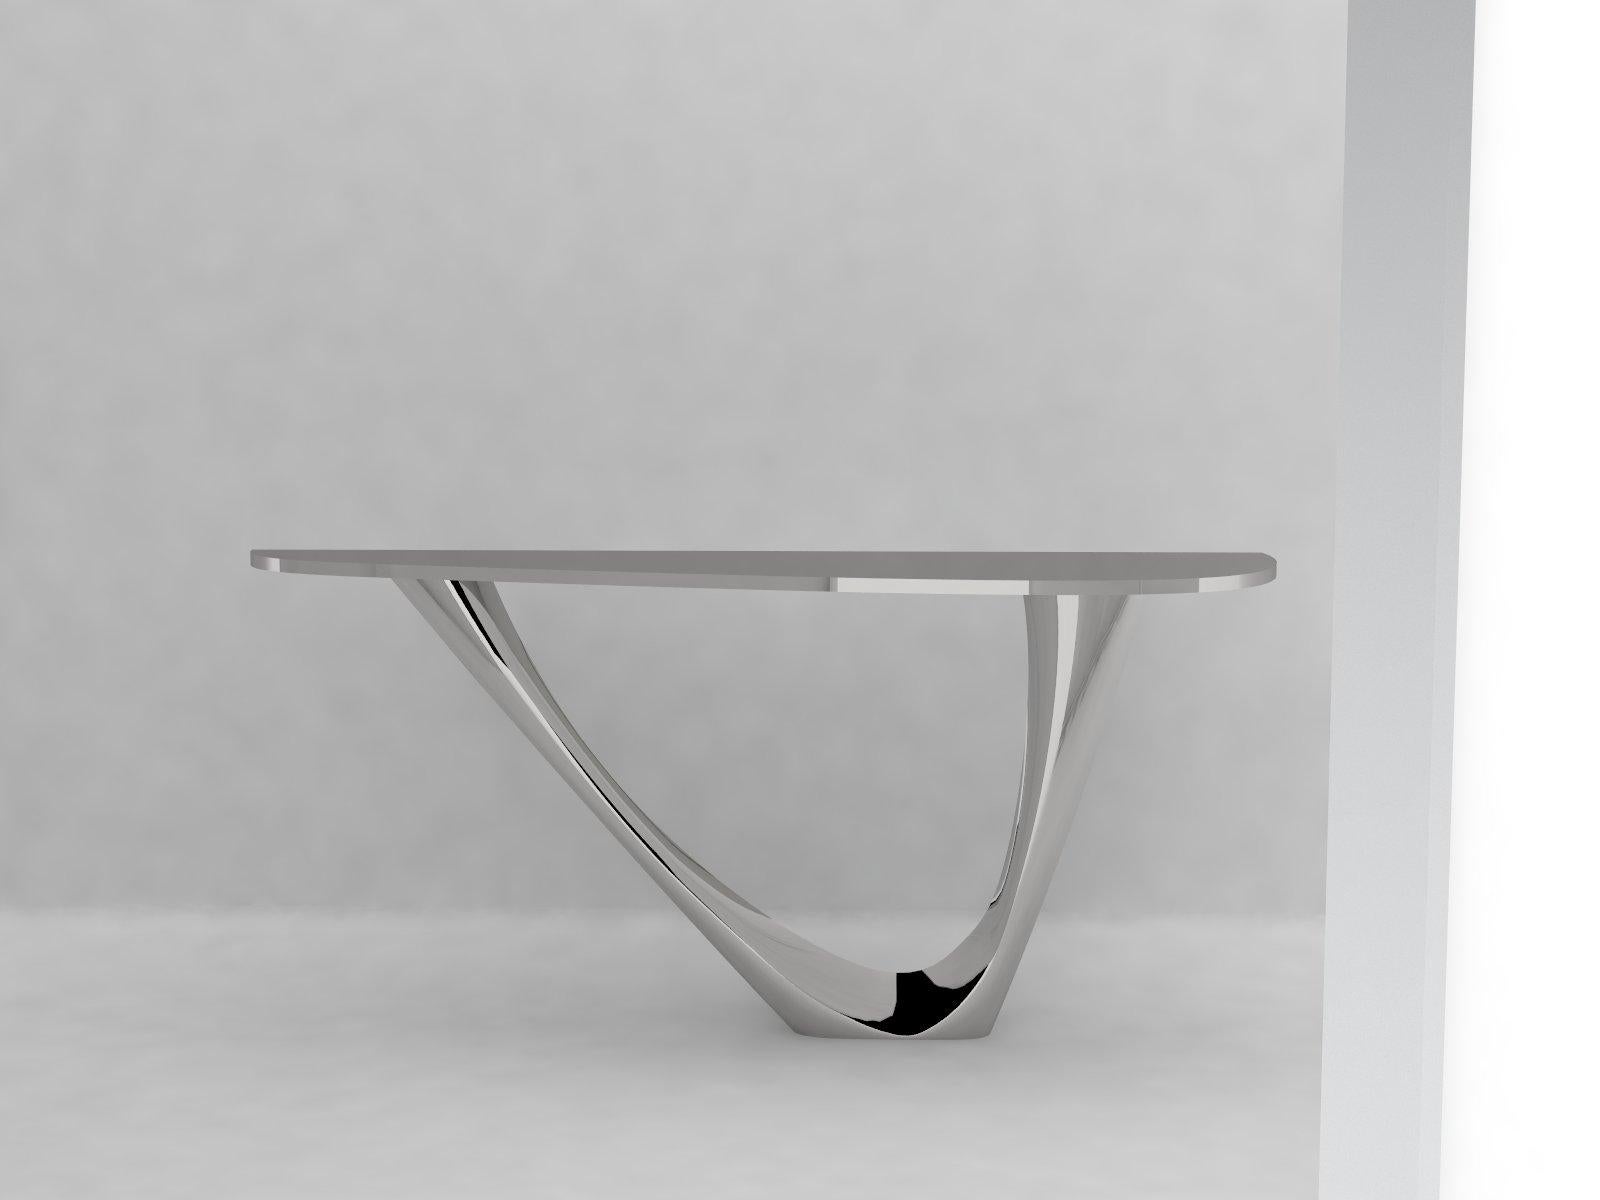 G-Console is another bionic object in our collection. Created for smaller spaces, it gives another possibility in interior planning and at the same time preserves unique shape of original G-Table. Both objects were made for enthusiasts of bionic